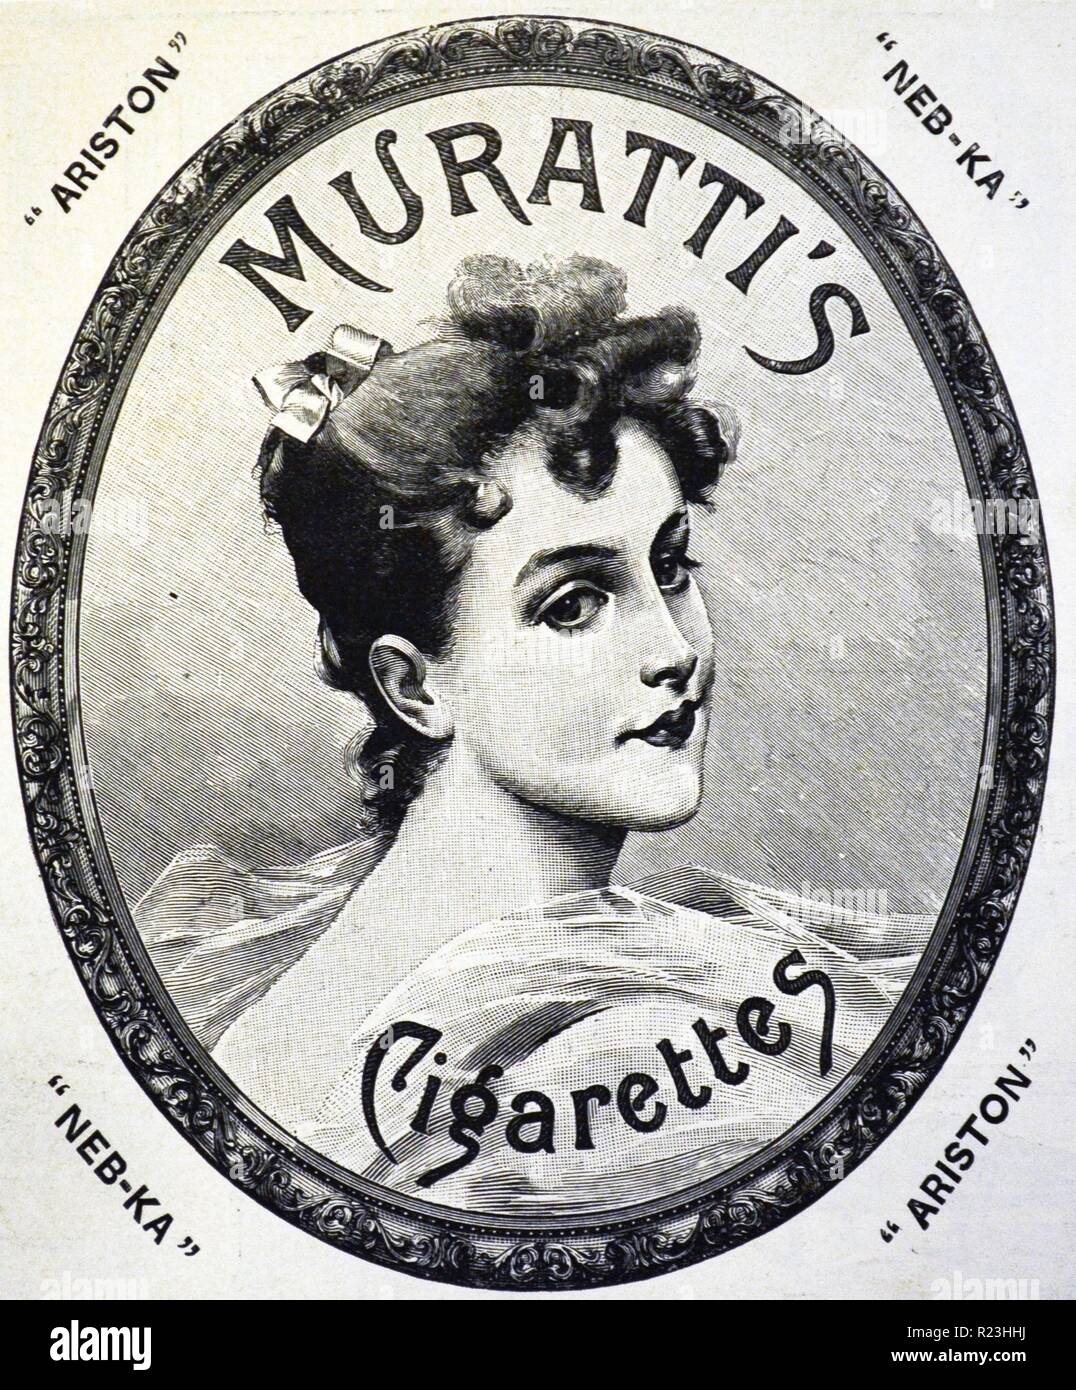 Advertisement for Muratt's turkish cigarettes using the image of a beautiful young woman, implying that smoking was acceptale for a women. From ''The Illustrated London News, London, 1895. Stock Photo